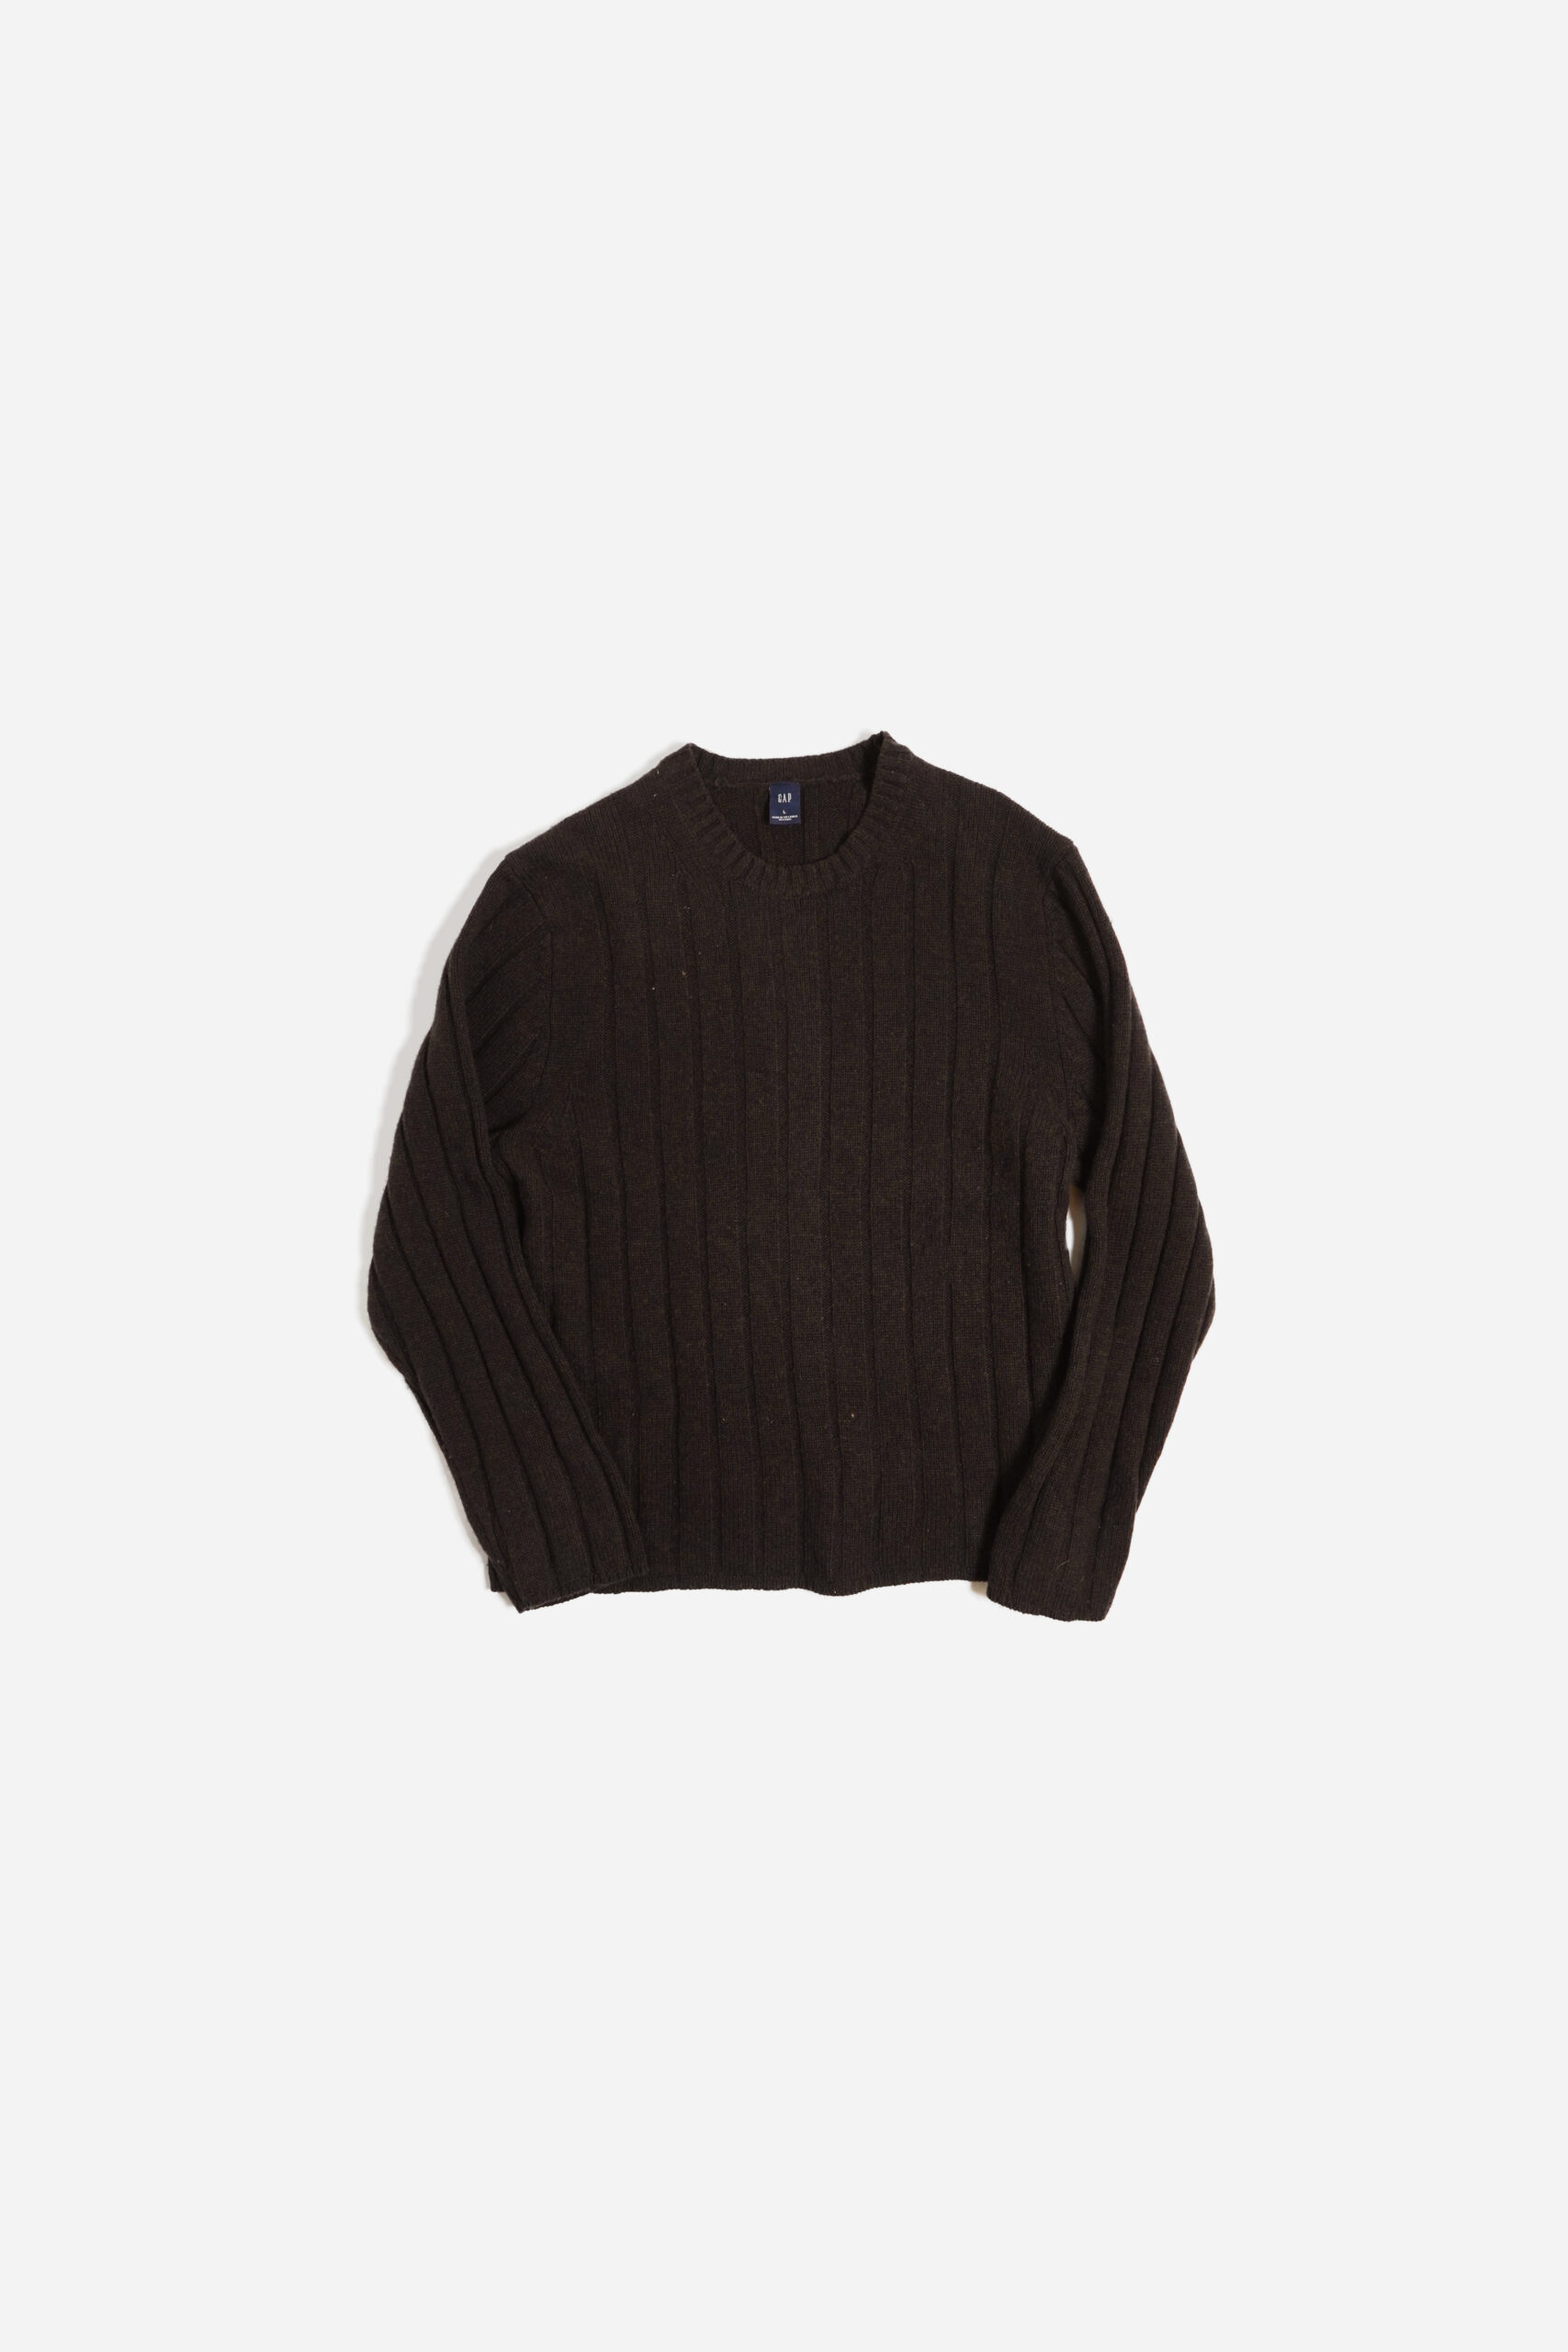 GAP OLD KNIT SWEATER